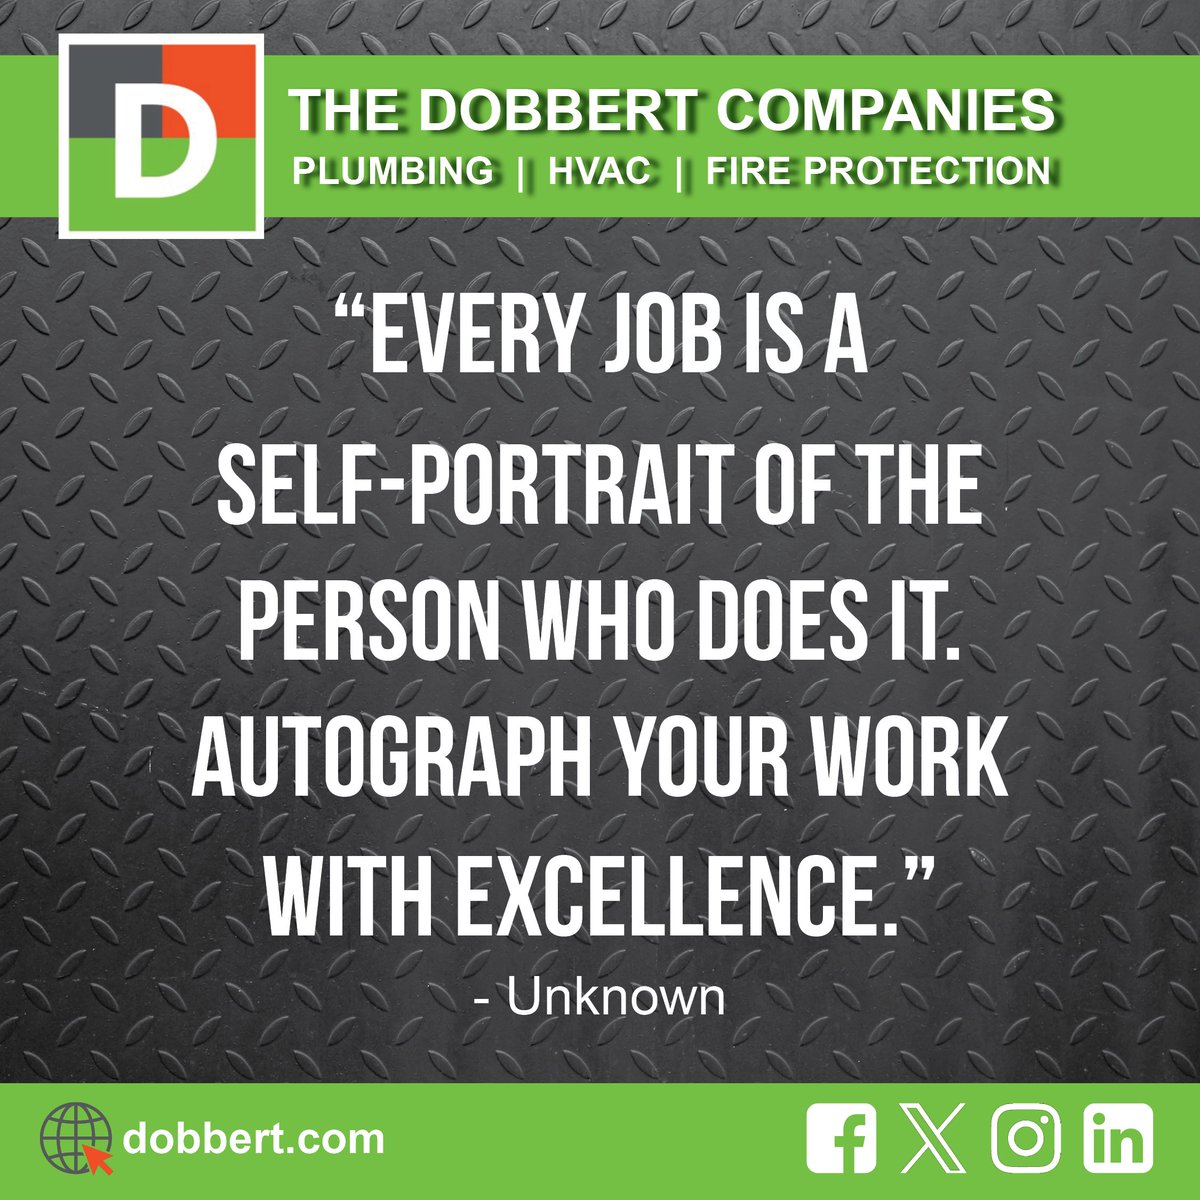 Motivational Monday...

“Every job is a self-portrait of the person who does it. Autograph your work with excellence.” - Unknown

#dobbert #dobbertcos #HVAC #plumbing #fireprotection #motivation  #MondayMotivation #WorkMotivation